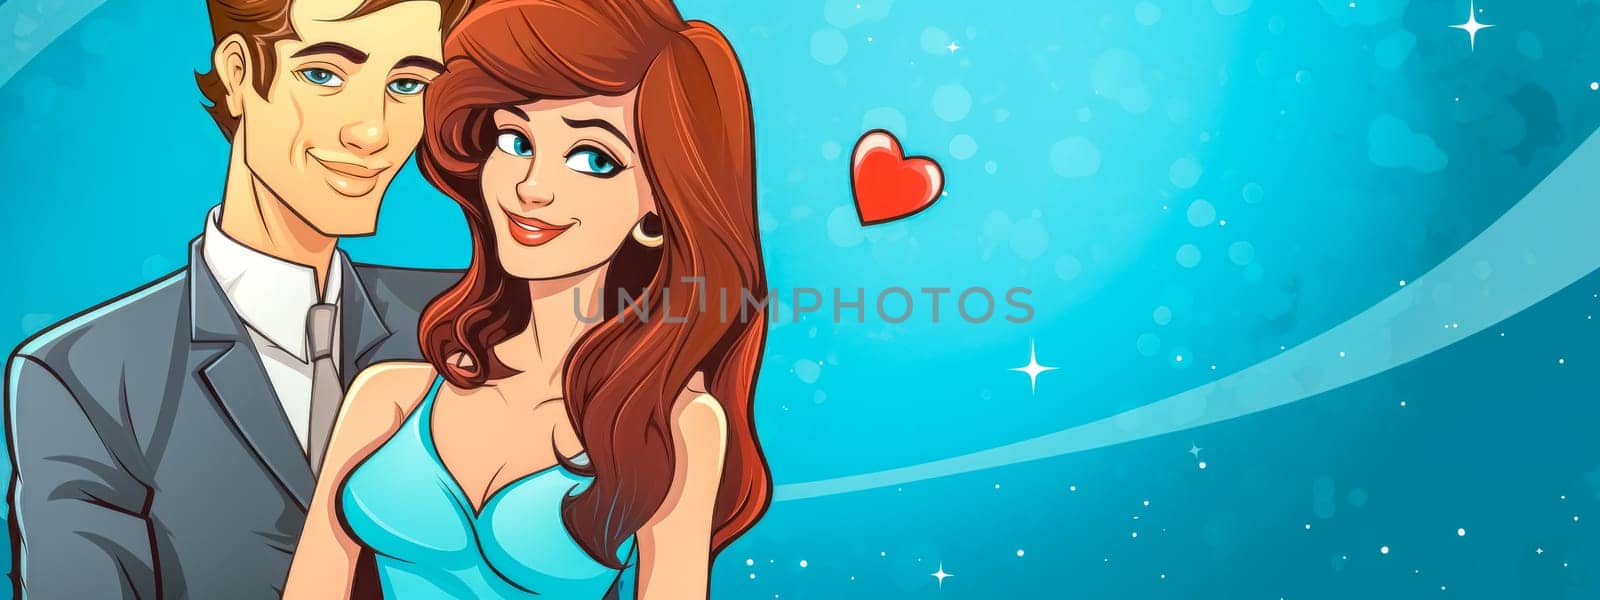 Animated couple in love with heart and stars background by Edophoto